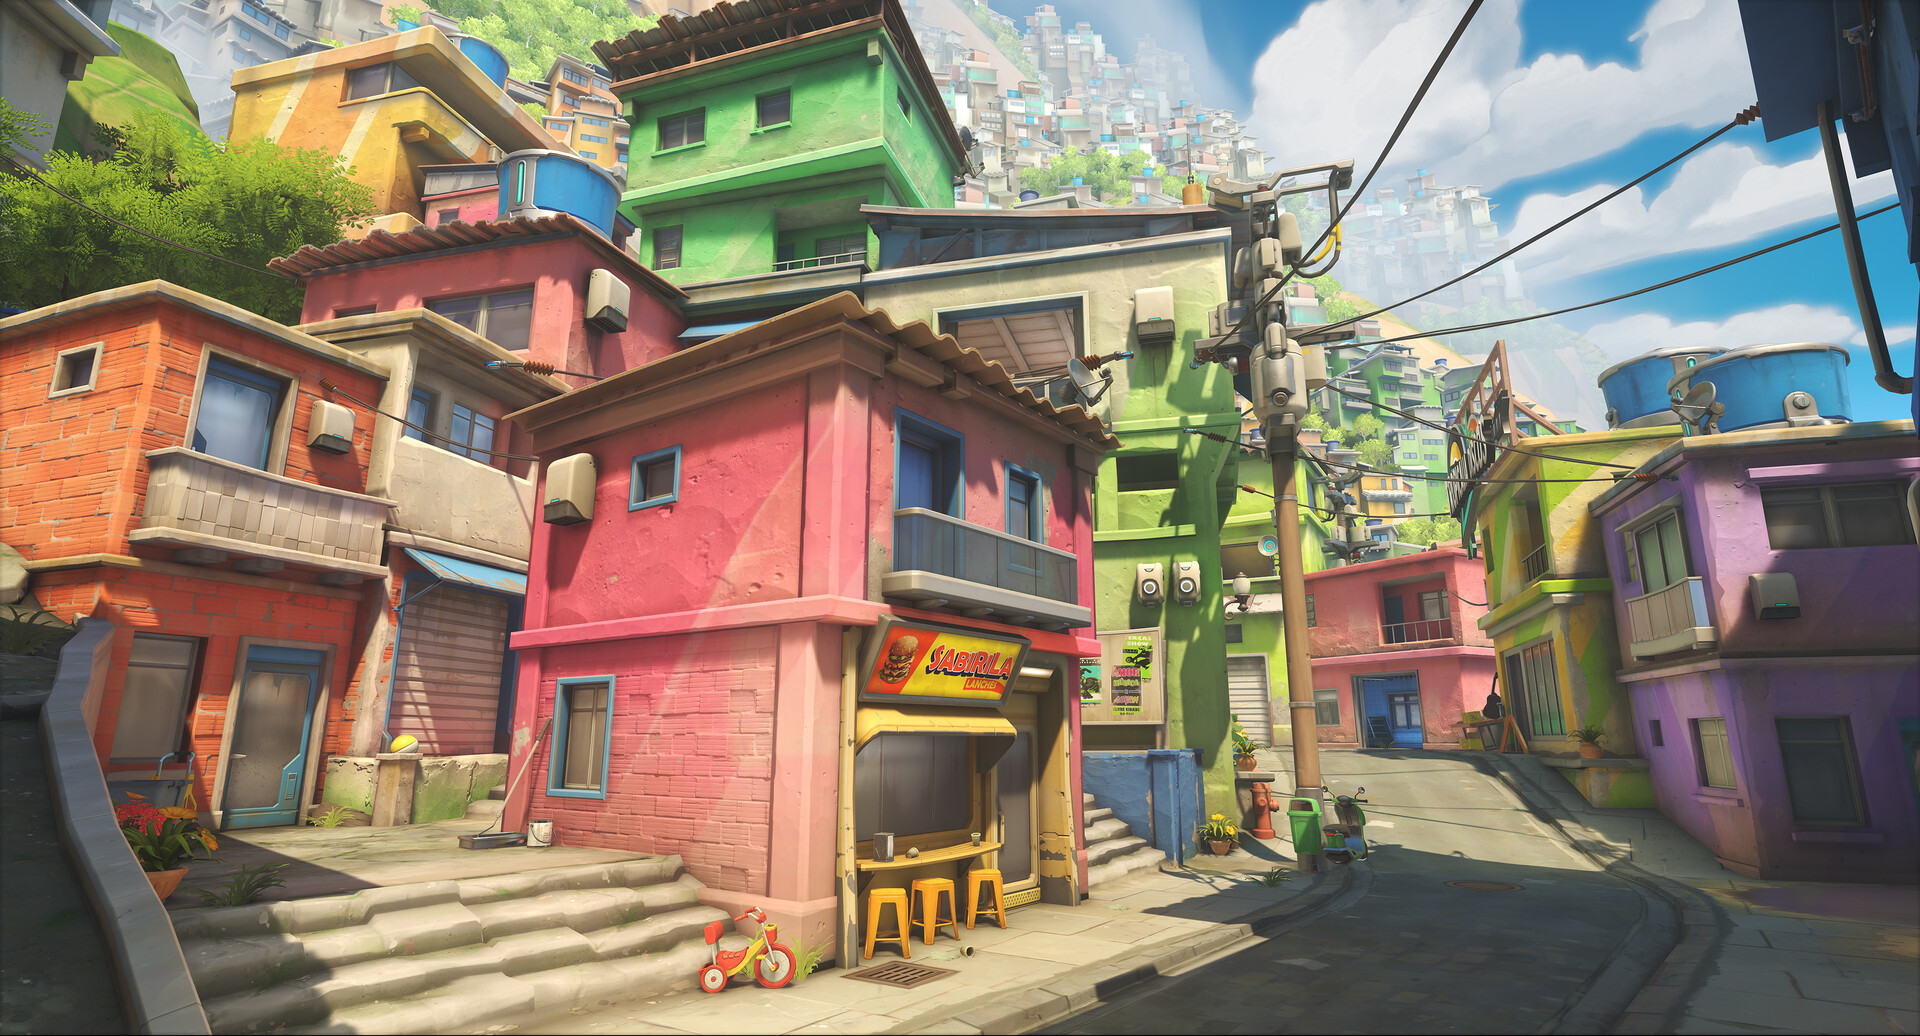 The streets of the Rio De Janeiro map in Overwatch 2